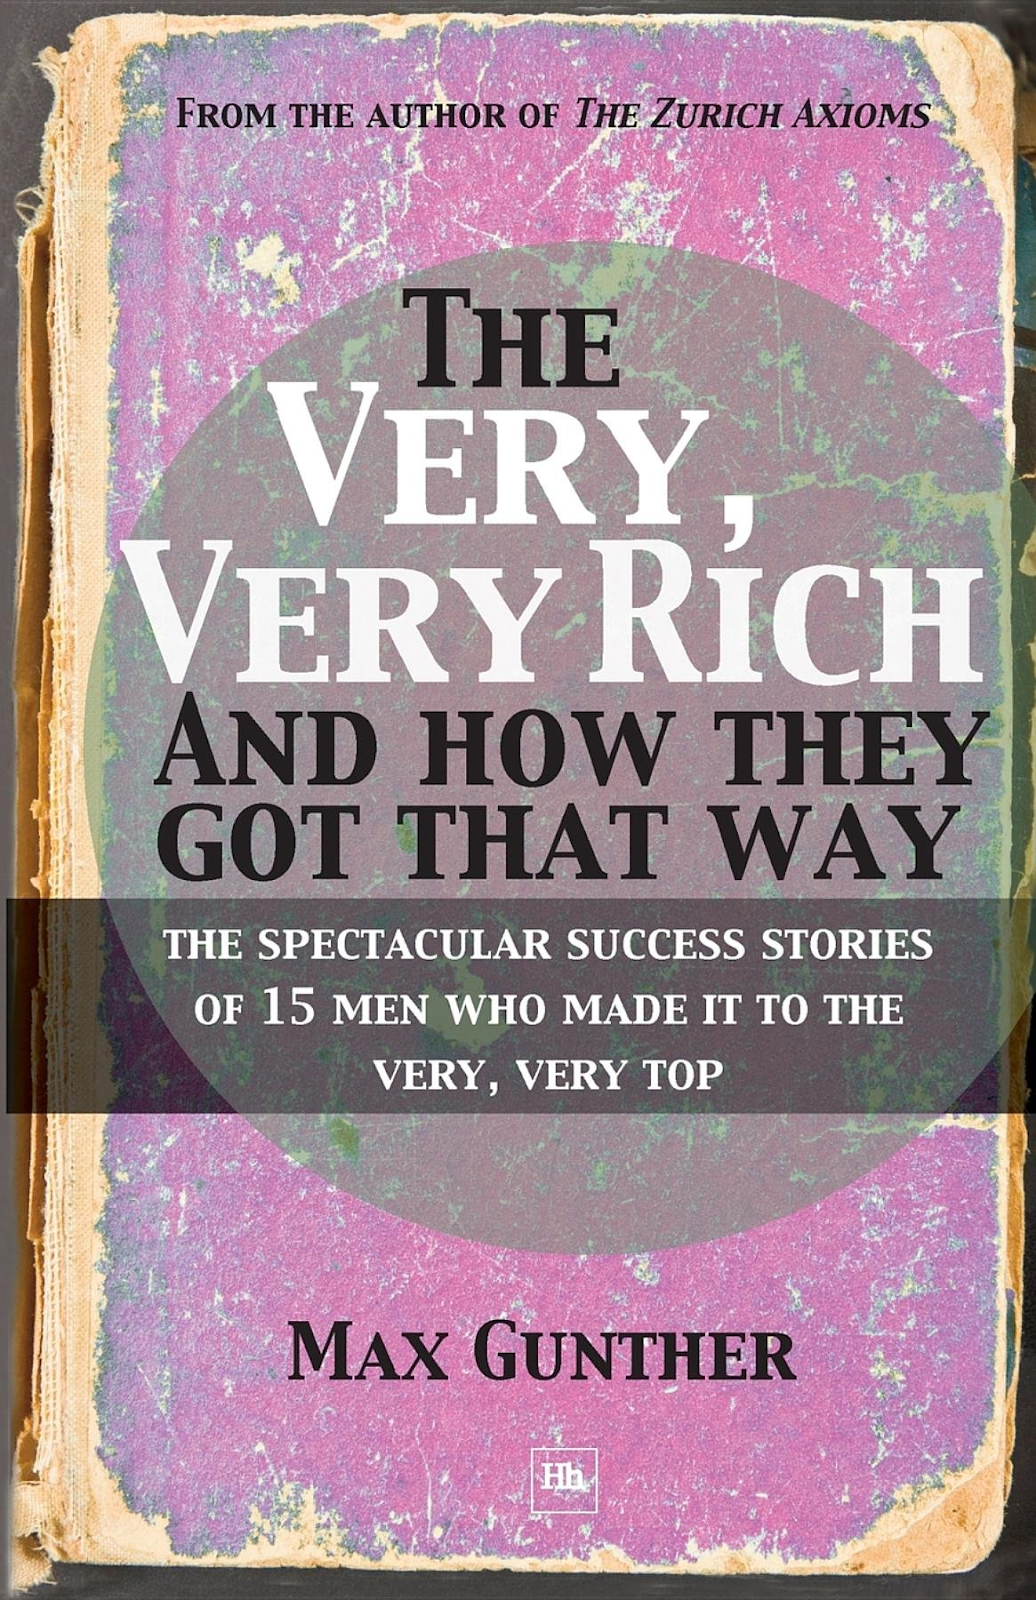 El libro "The Very, Very Rich and How They Got That Way"